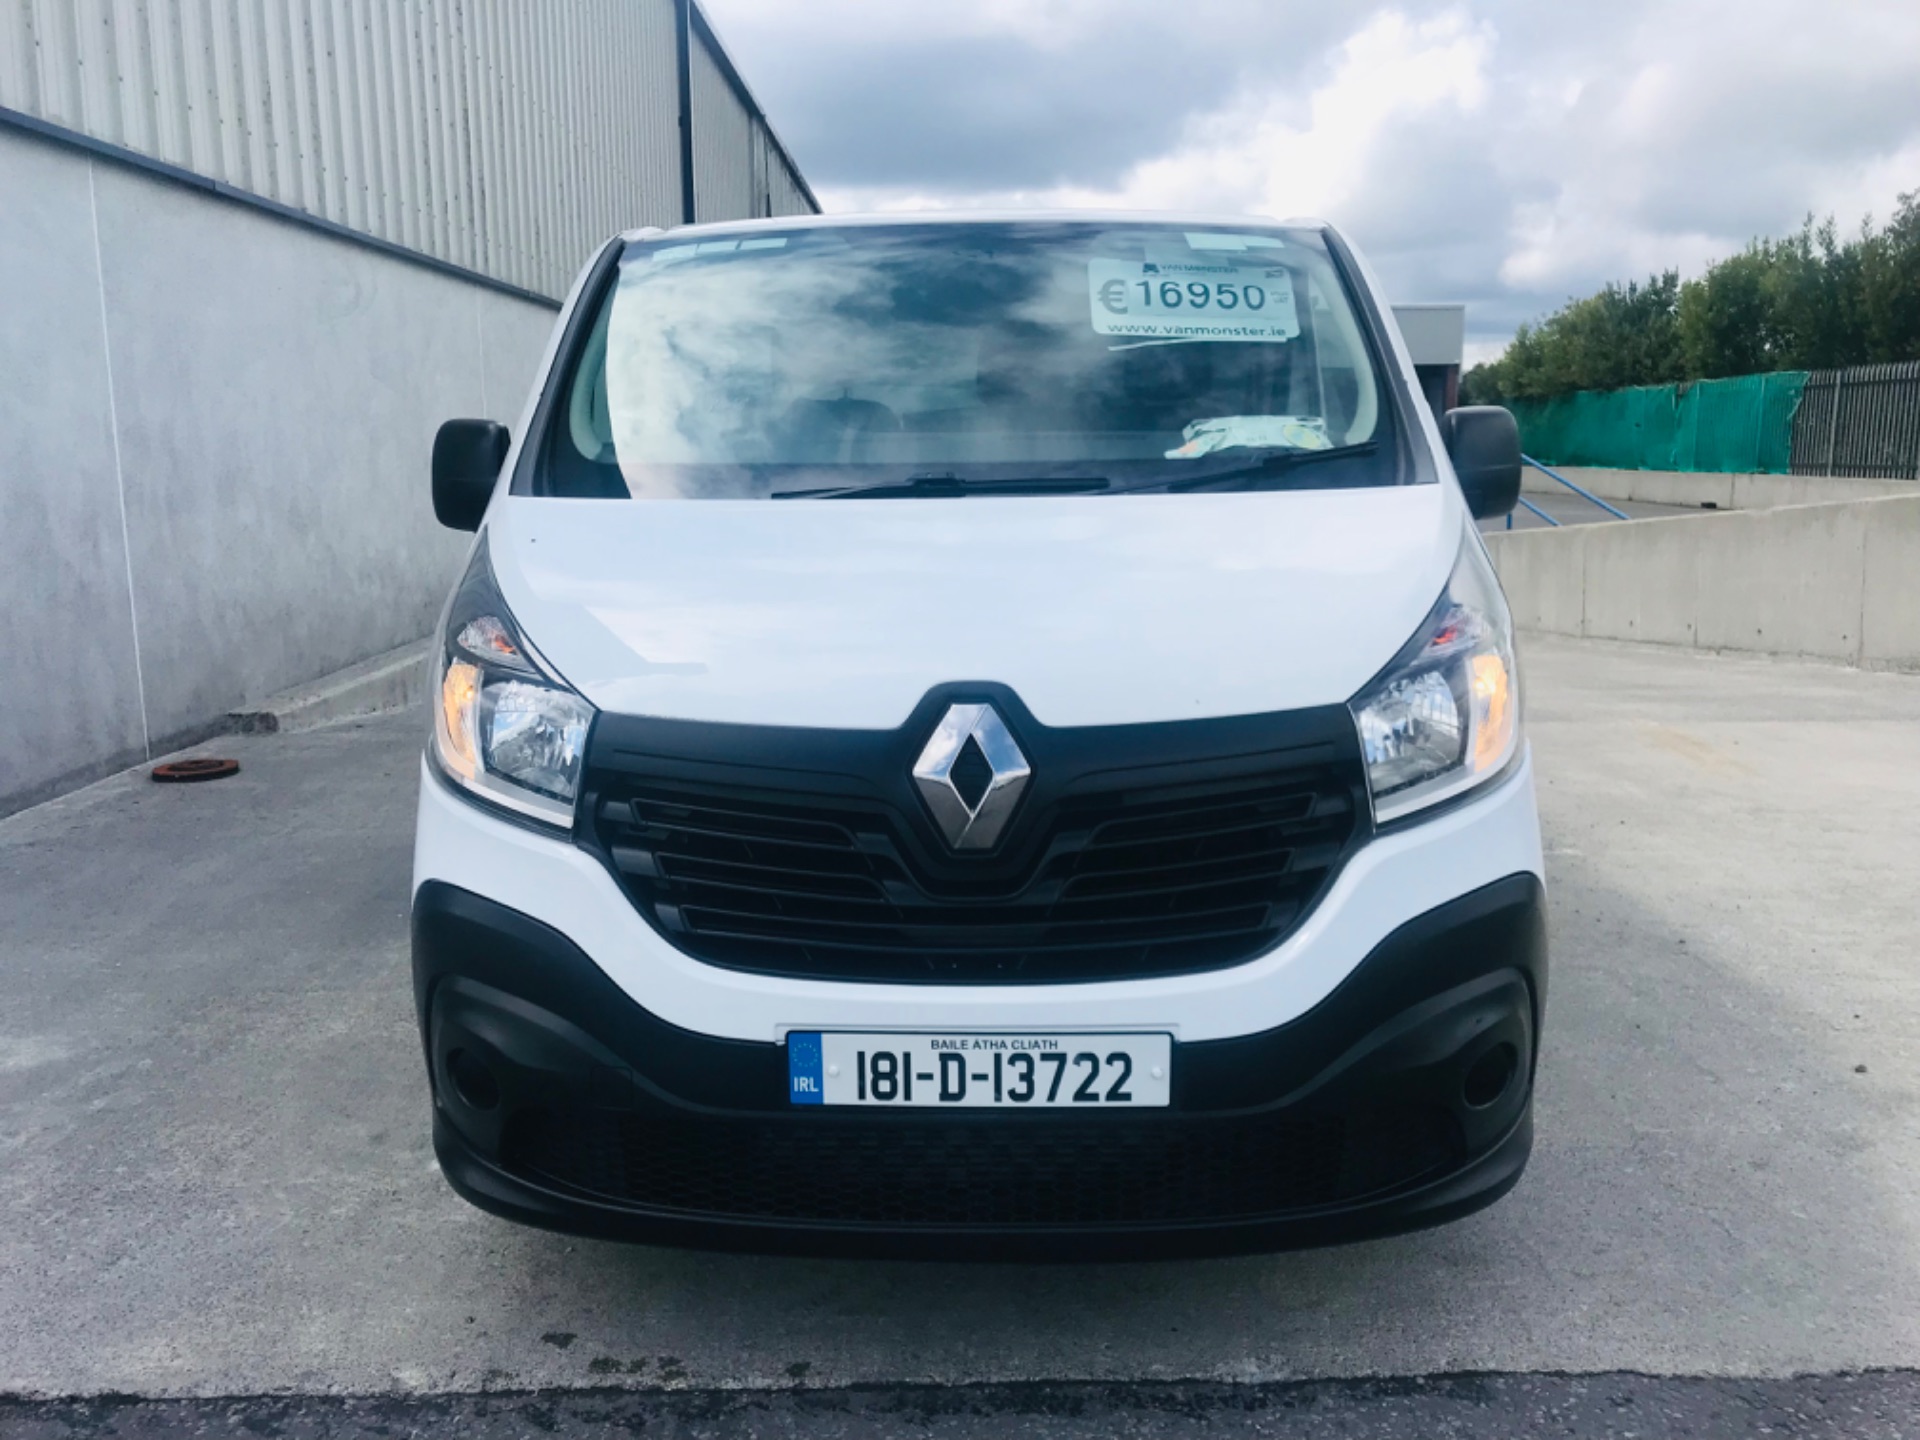 2018 Renault Trafic LL29 DCI 120 Business 3DR (181D13722) Thumbnail 2